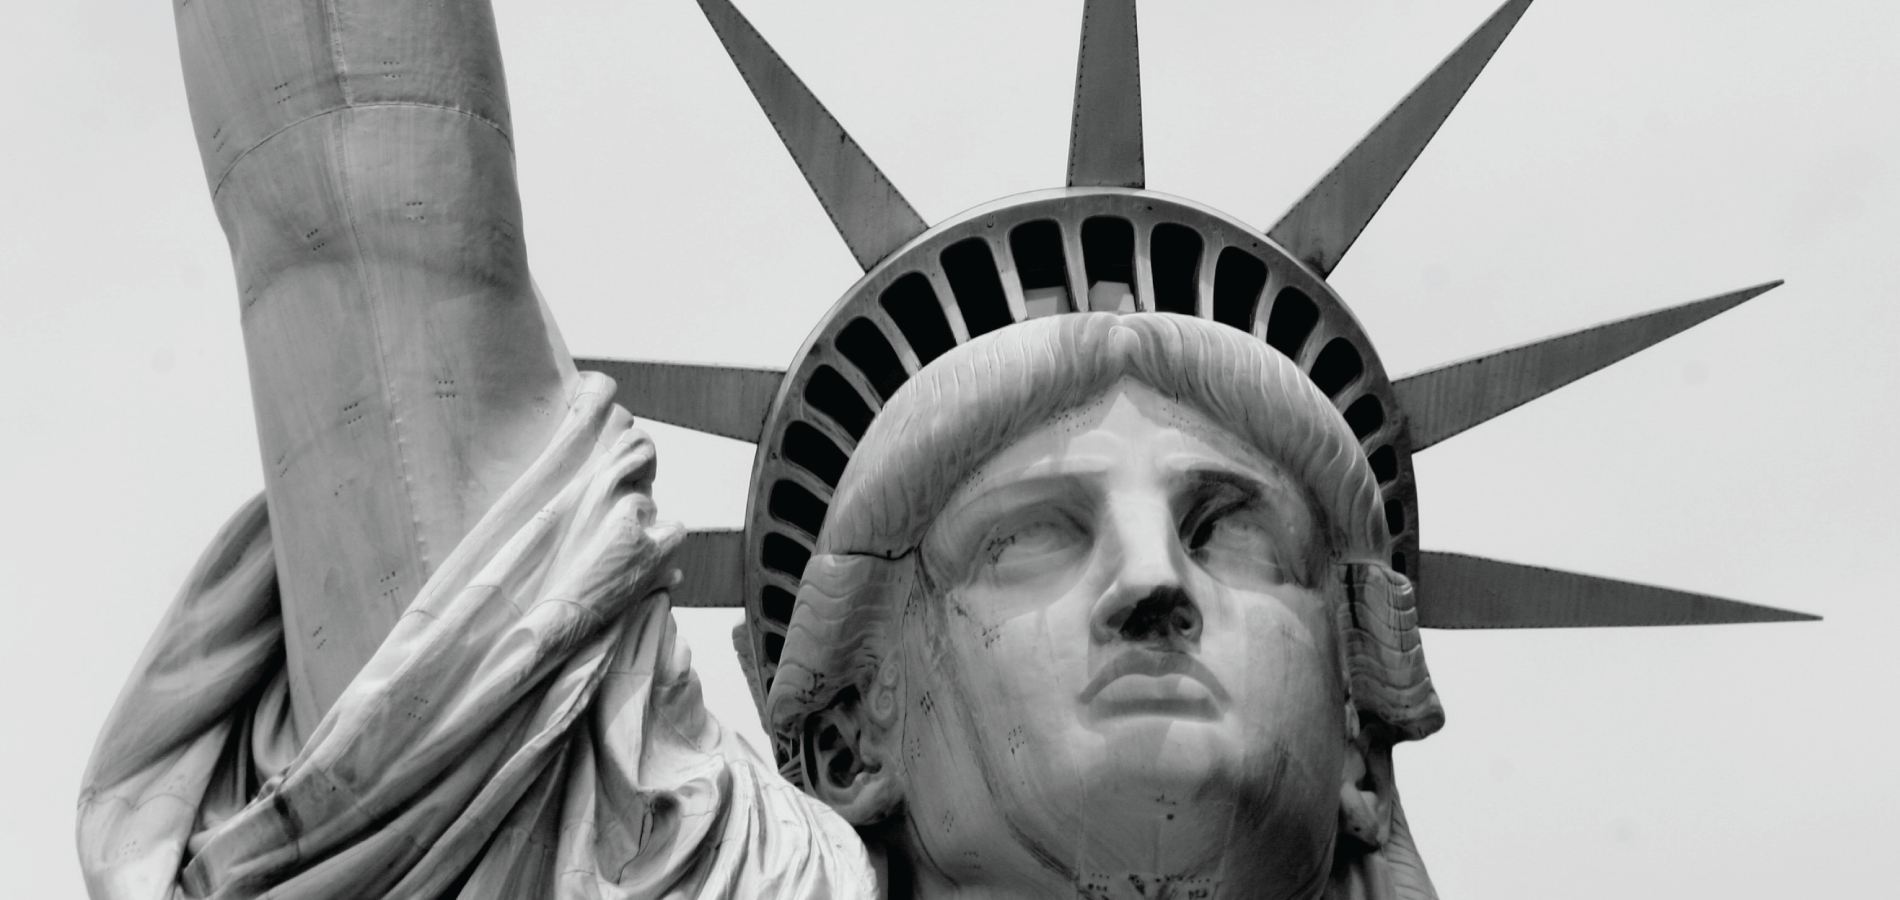 Picture of the statute of liberty